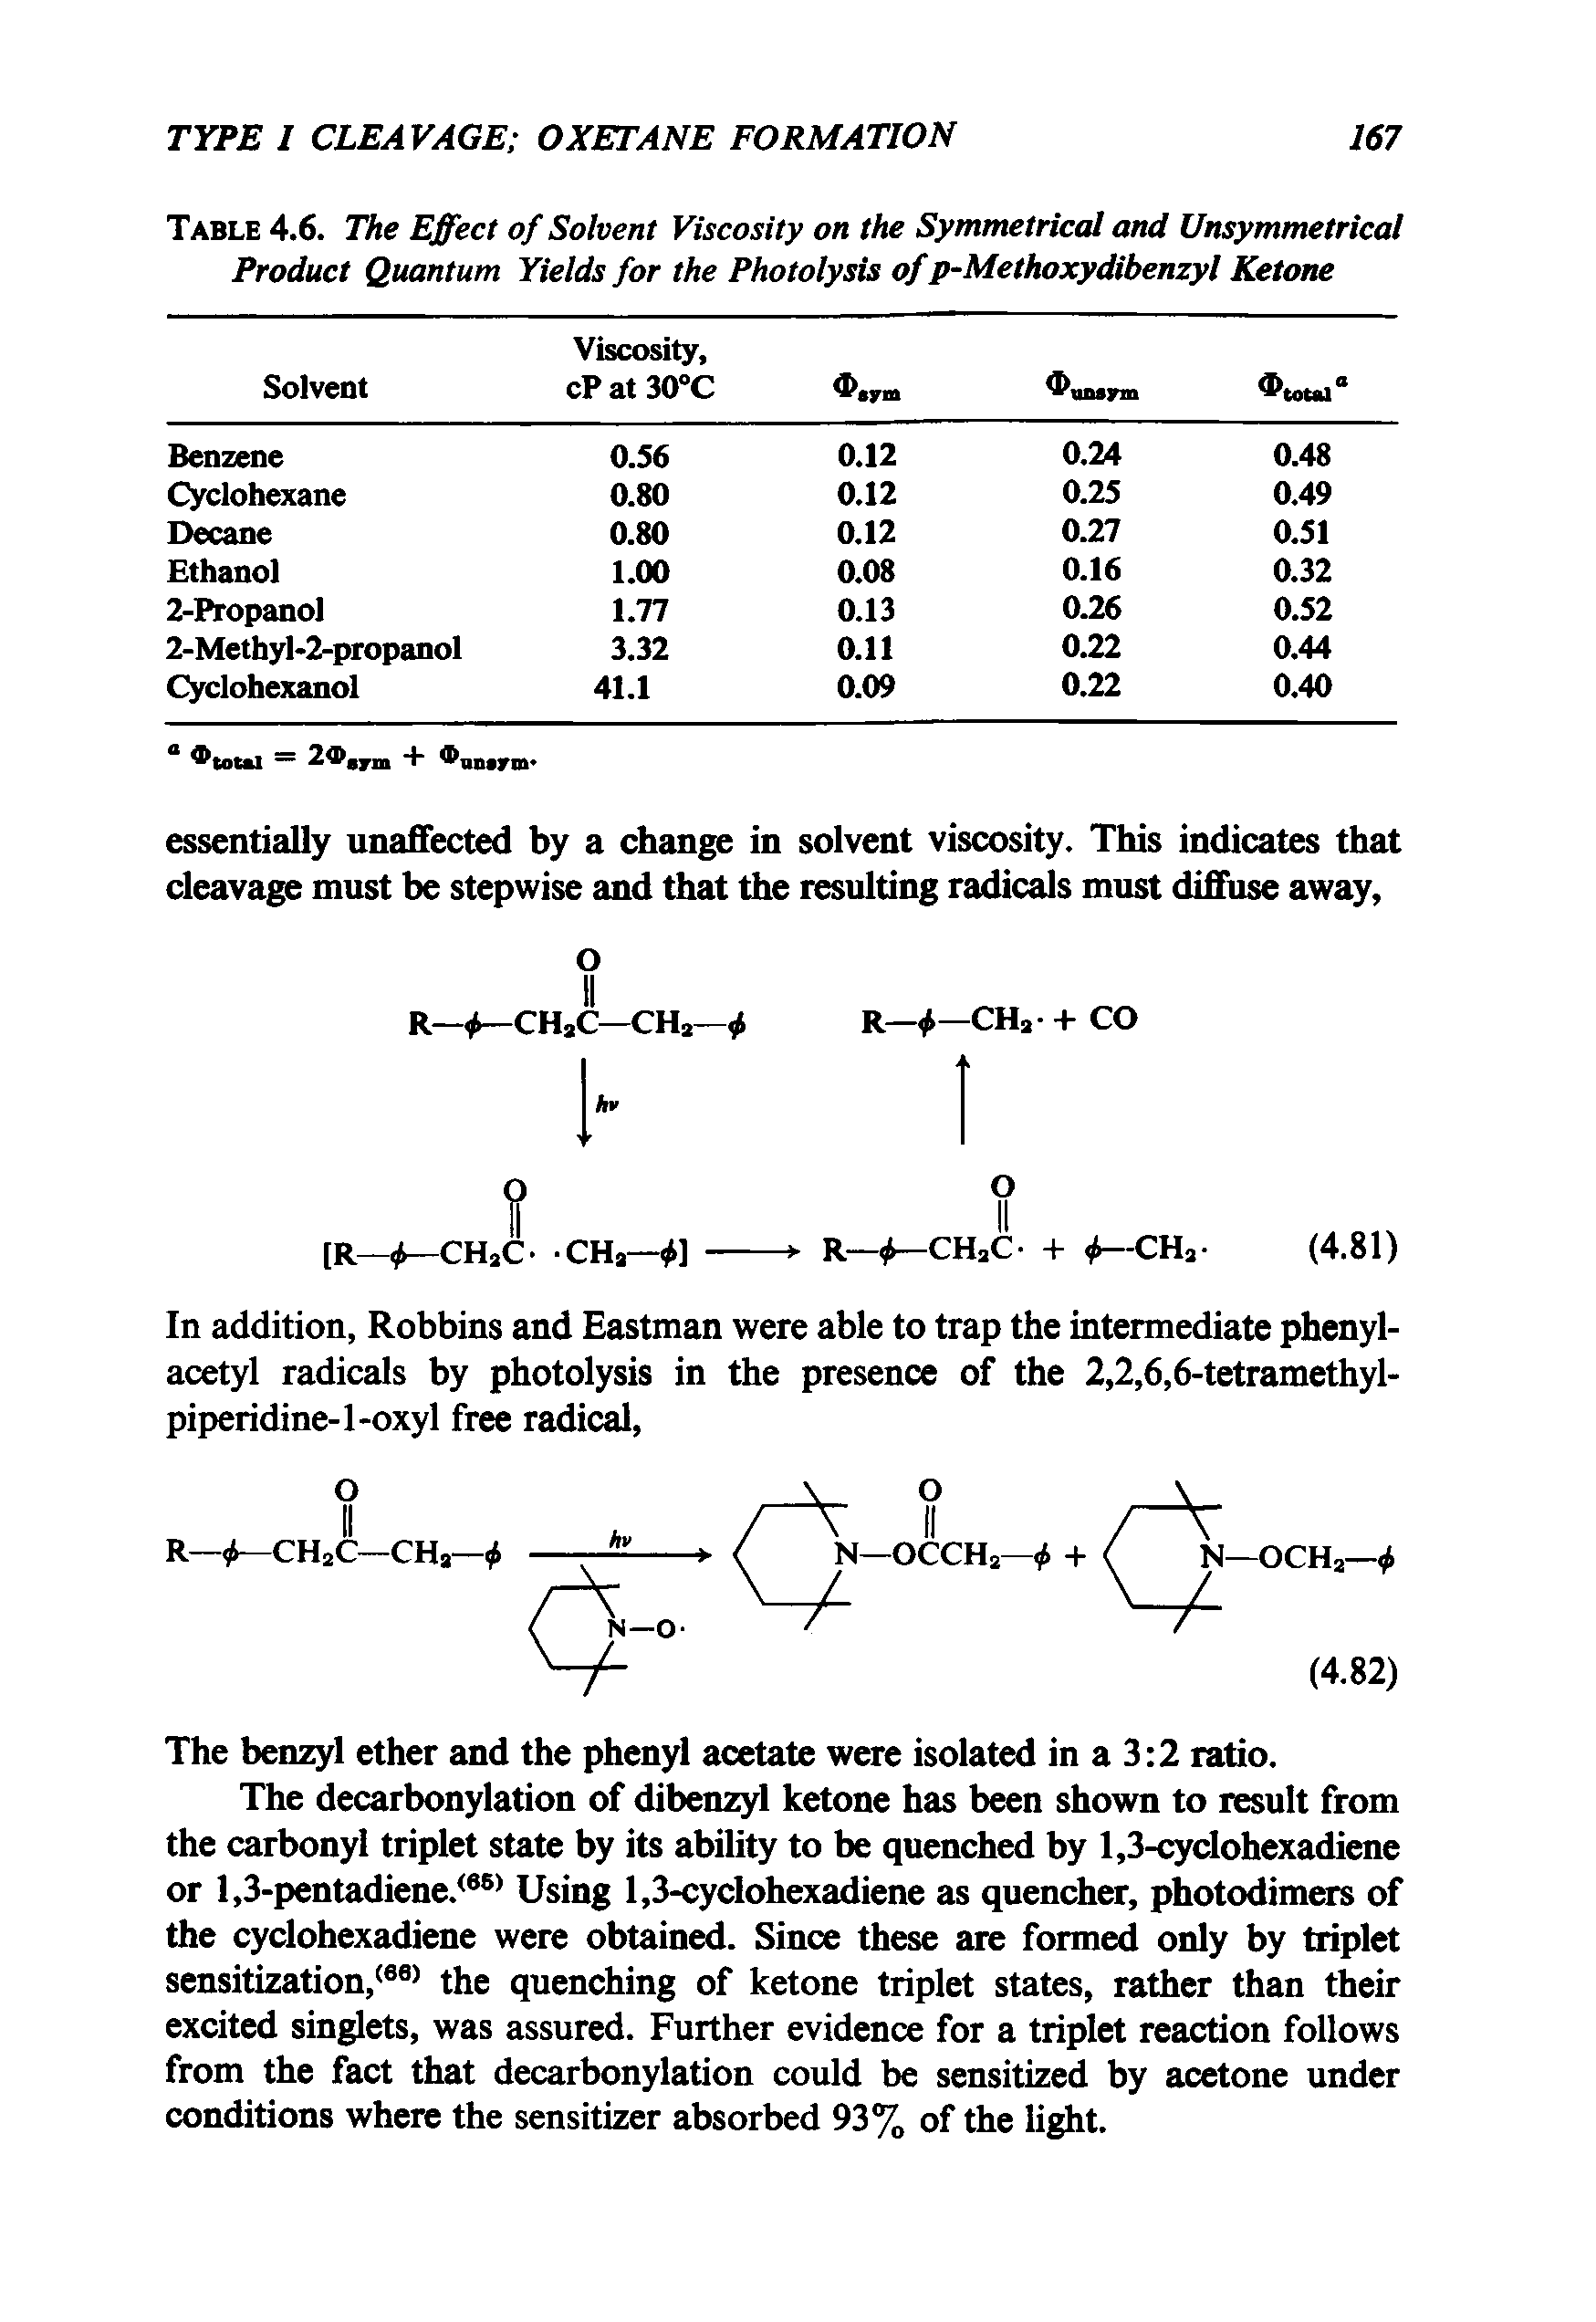 Table 4.6. The Effect of Solvent Viscosity on the Symmetrical and Unsymmetrical Product Quantum Yields for the Photolysis of p-Methoxydibenzyl Ketone...